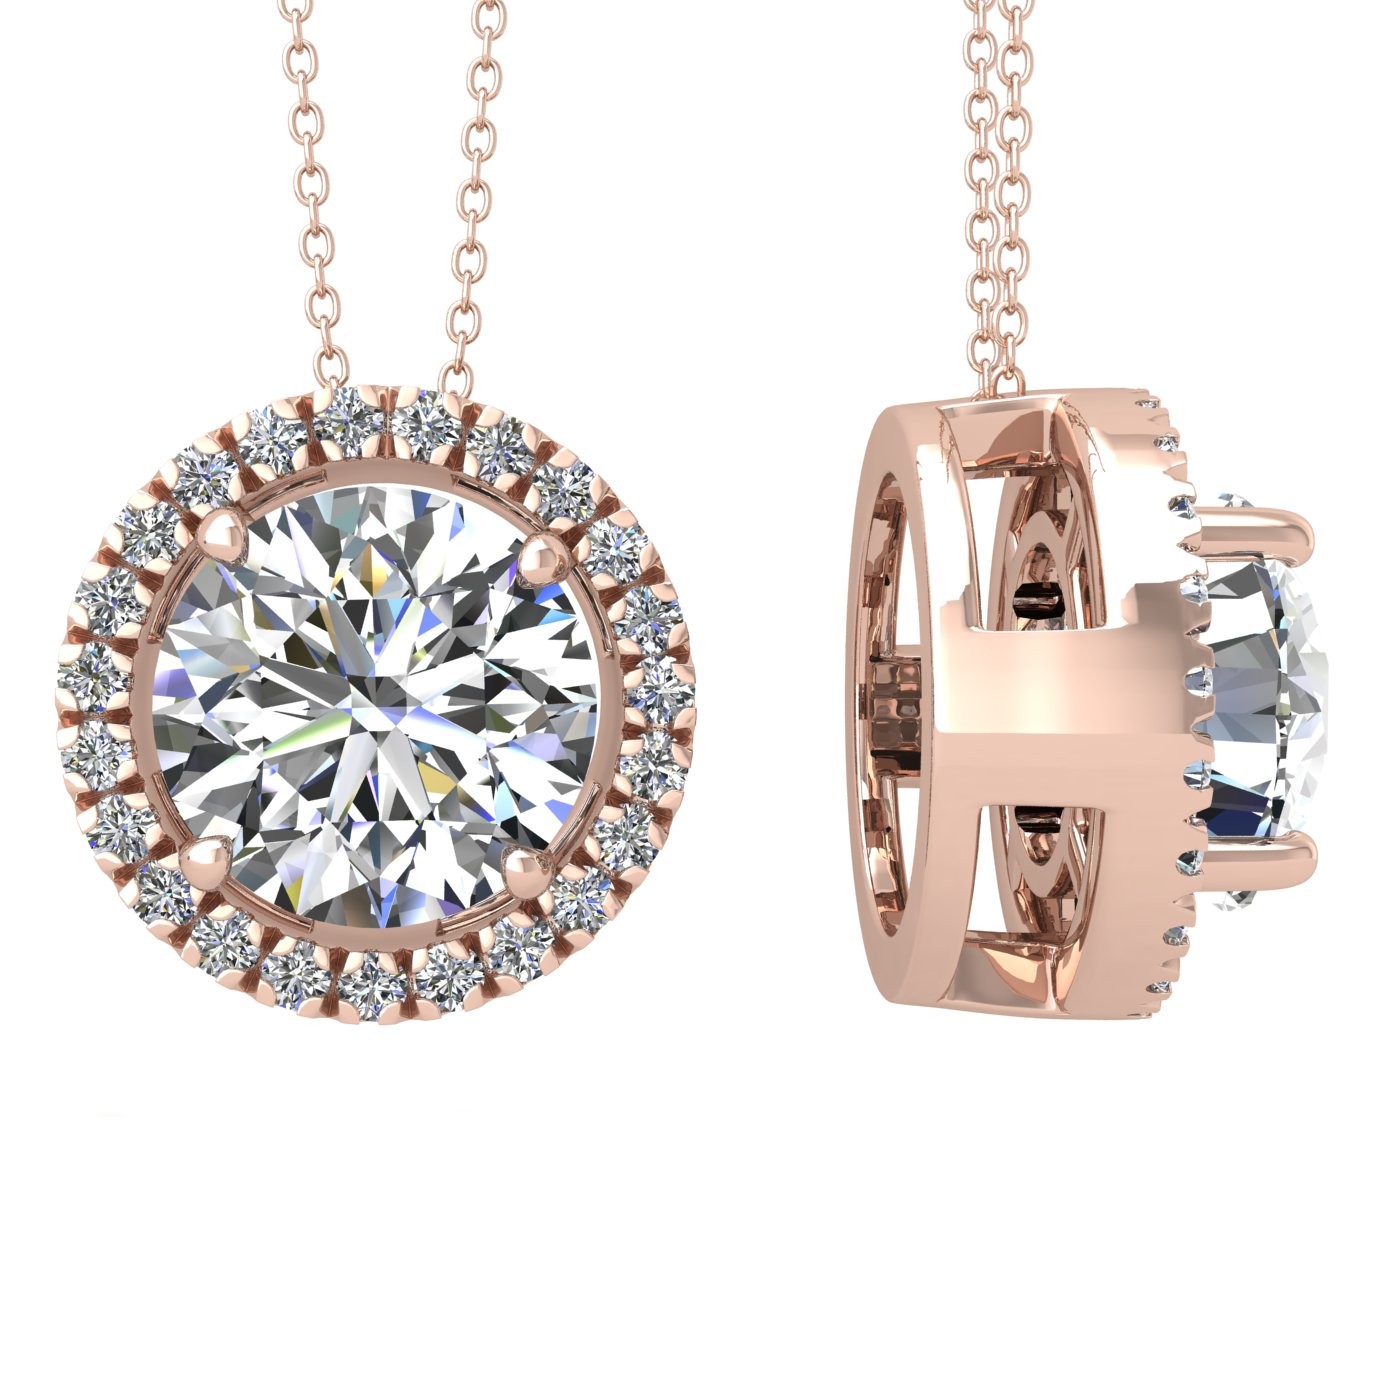 18k rose gold 2 ct 4 prong round shape diamond pendant with diamond pavÉ set halo including chain seperate from the pendant Photos & images